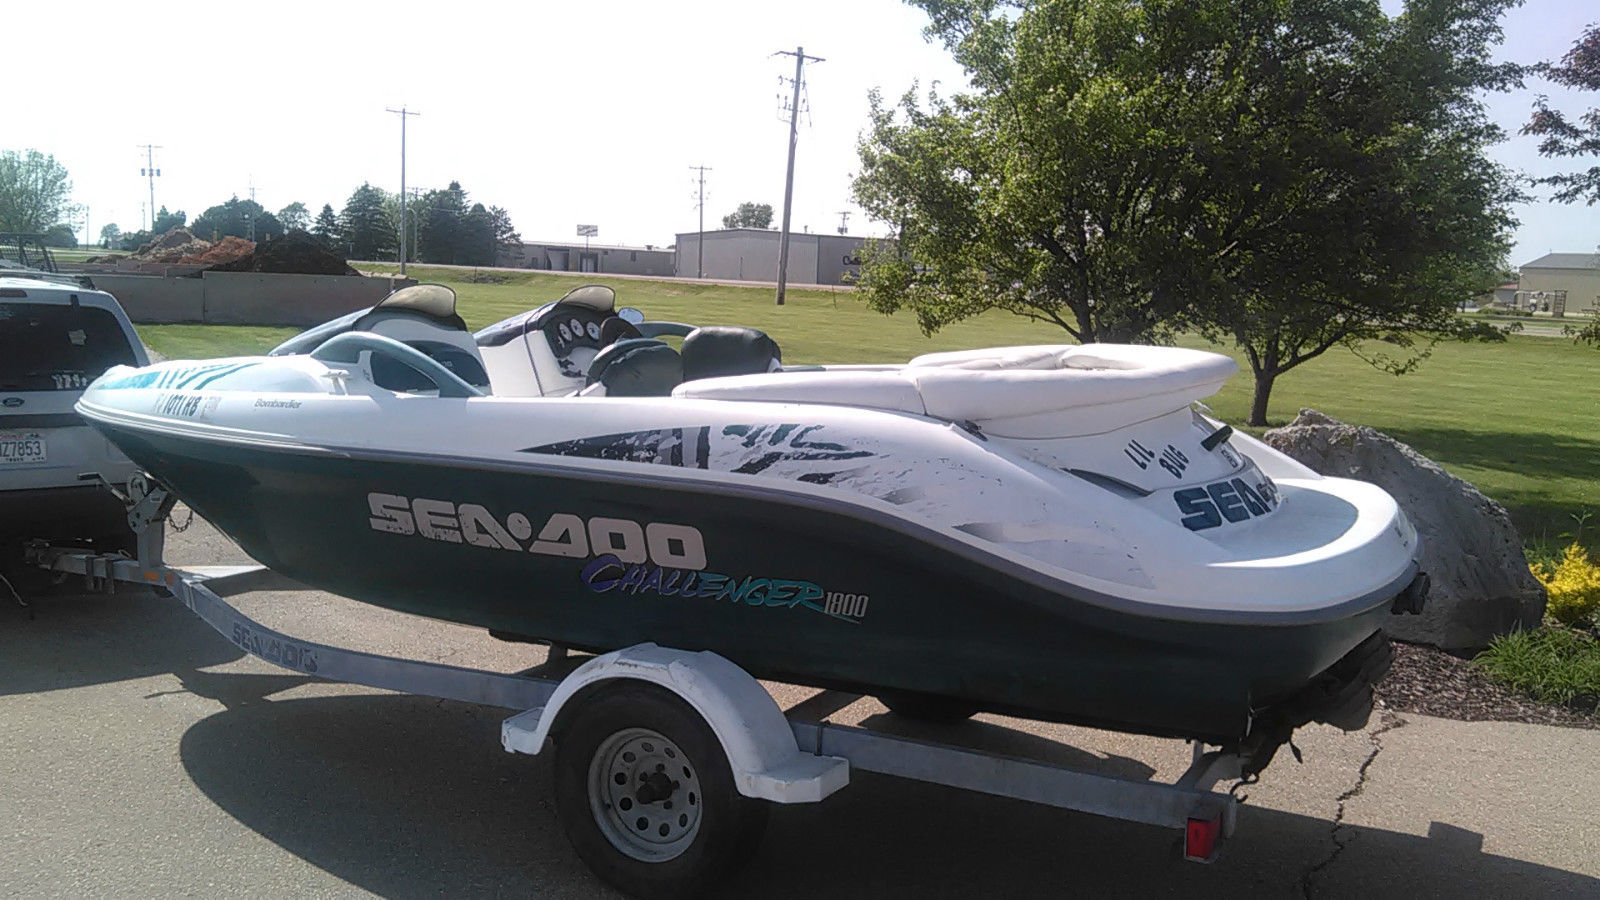 Sea Doo Challenger 1800 1997 for sale for $7,200 - Boats ...